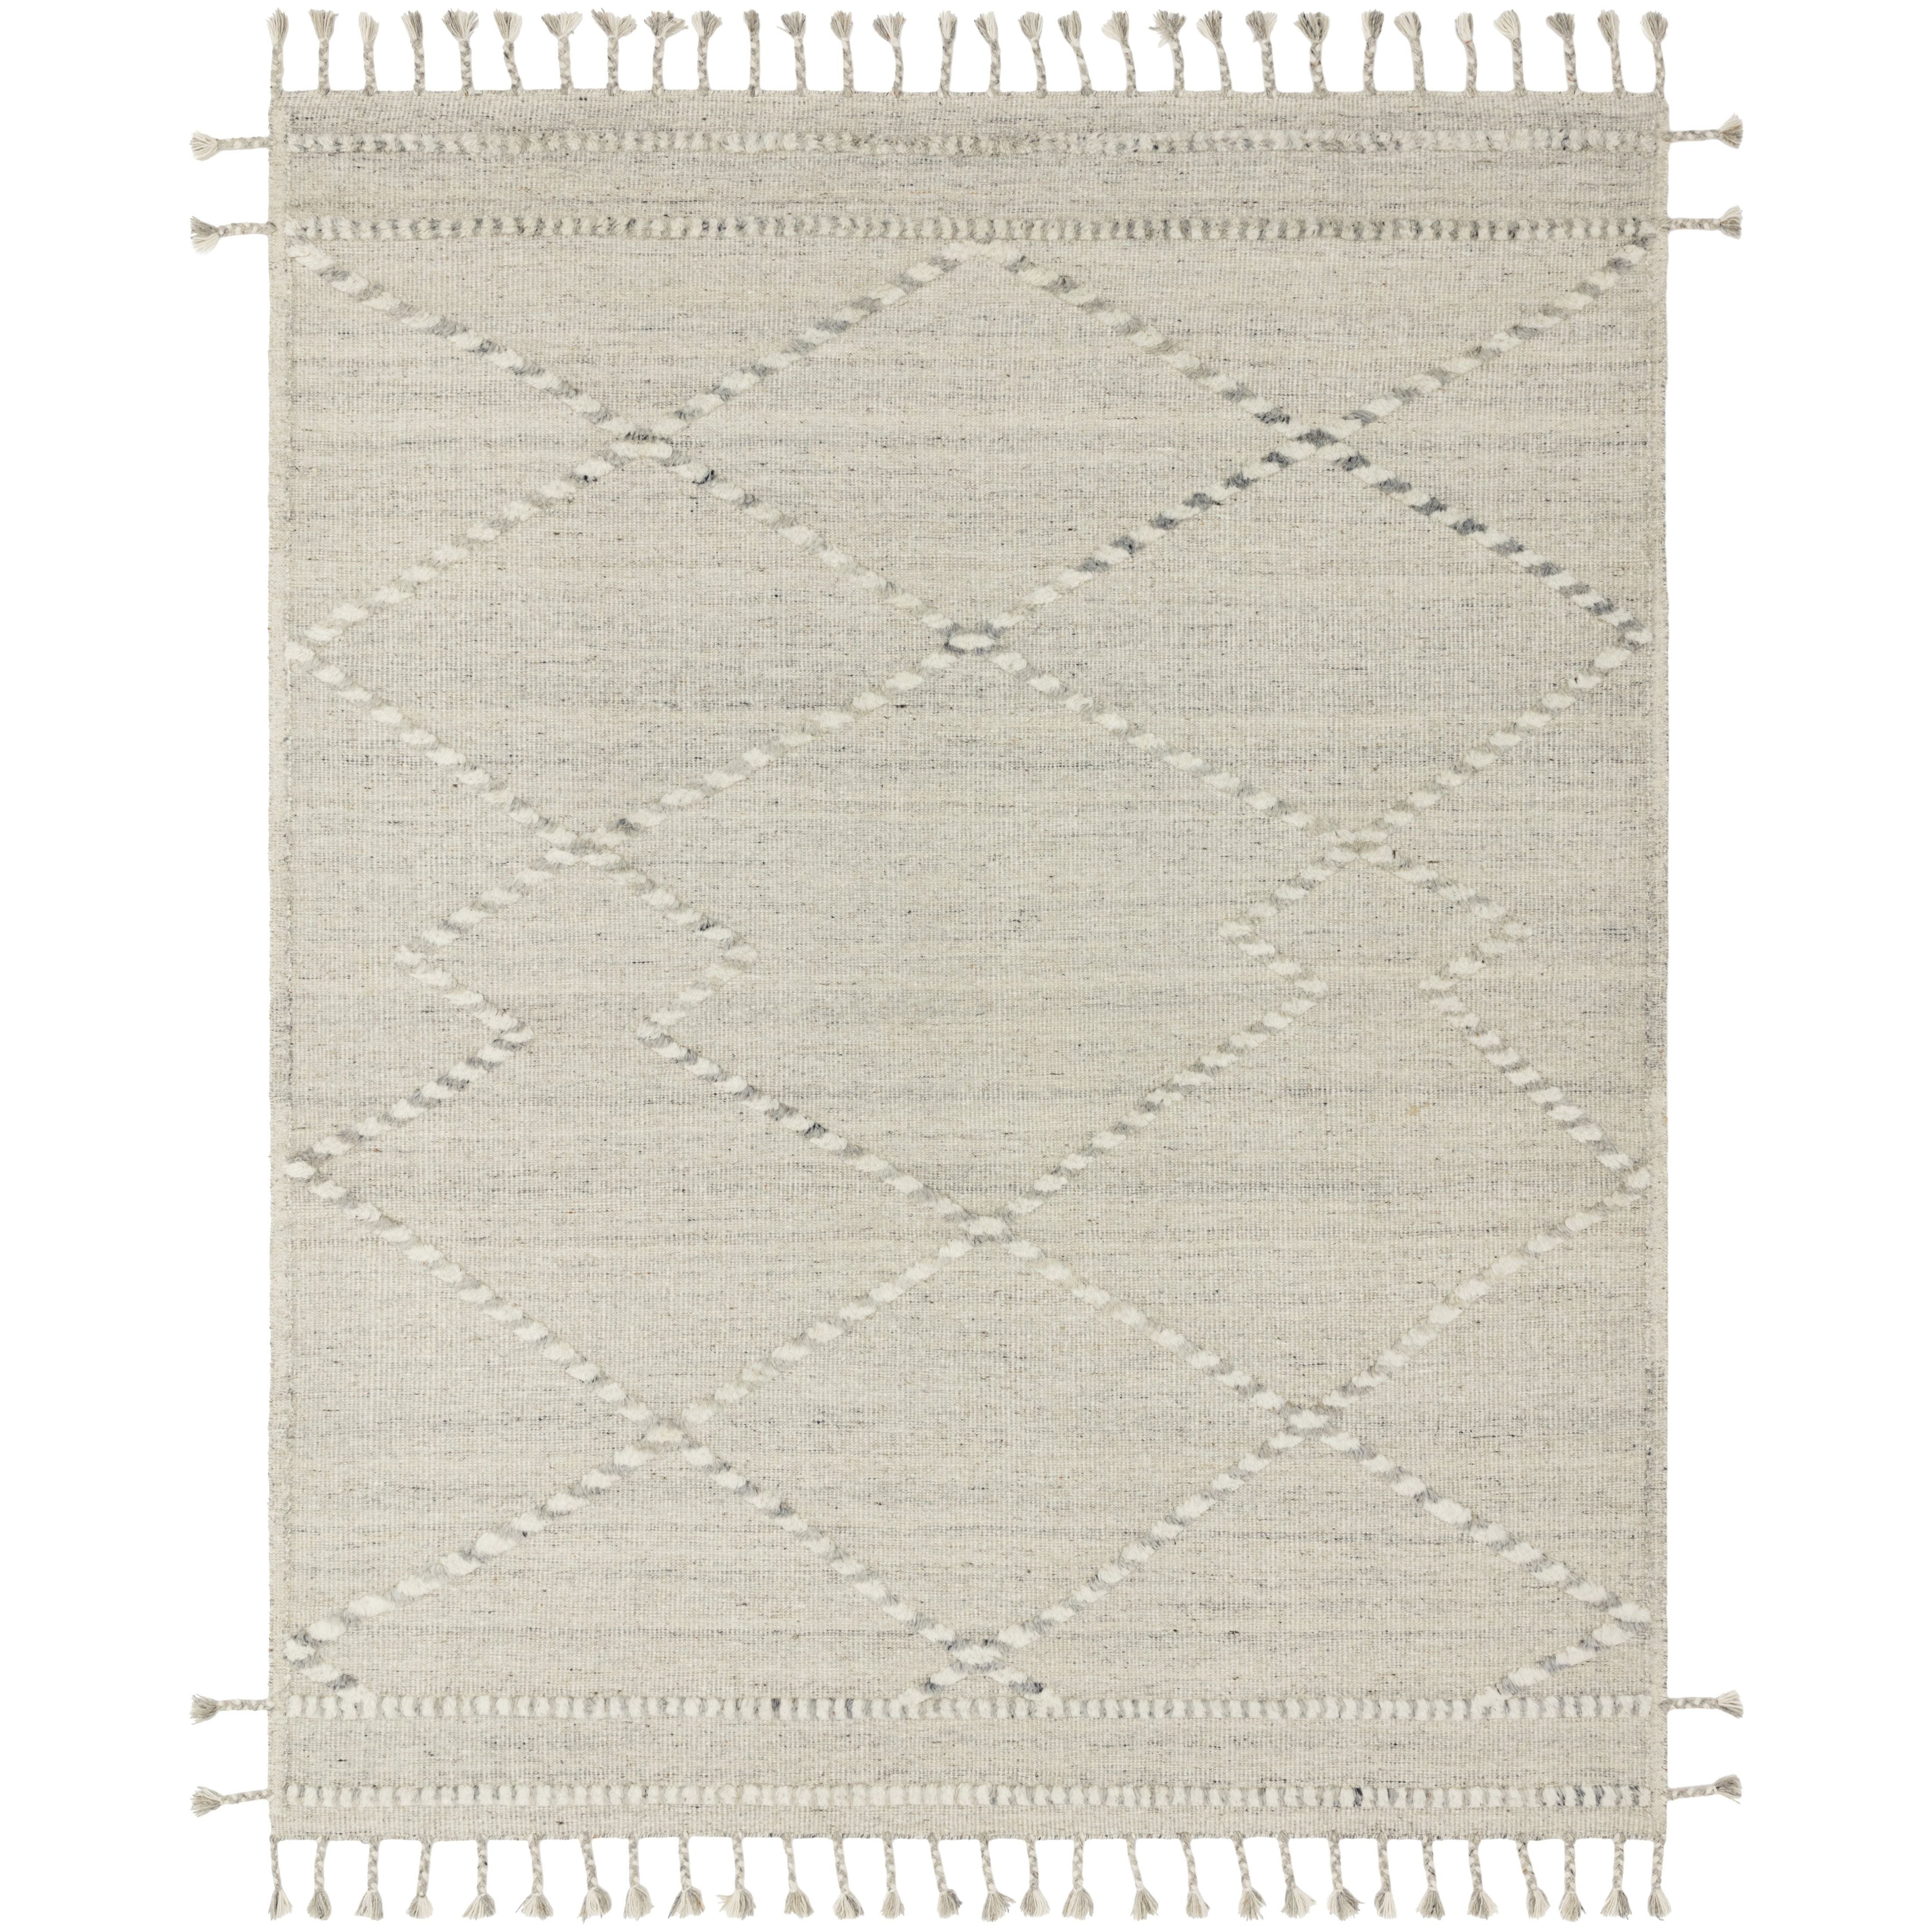 Iman Ivory/Light Grey Rug - Amethyst Home A new take on Moroccan style rugs, the Iman Collection is hand-knotted of 100% wool pile by skilled artisans in India. The surface features linear and braided details, creating tonal variations that make each piece unique. Plus, each design is finished with playful fringe.